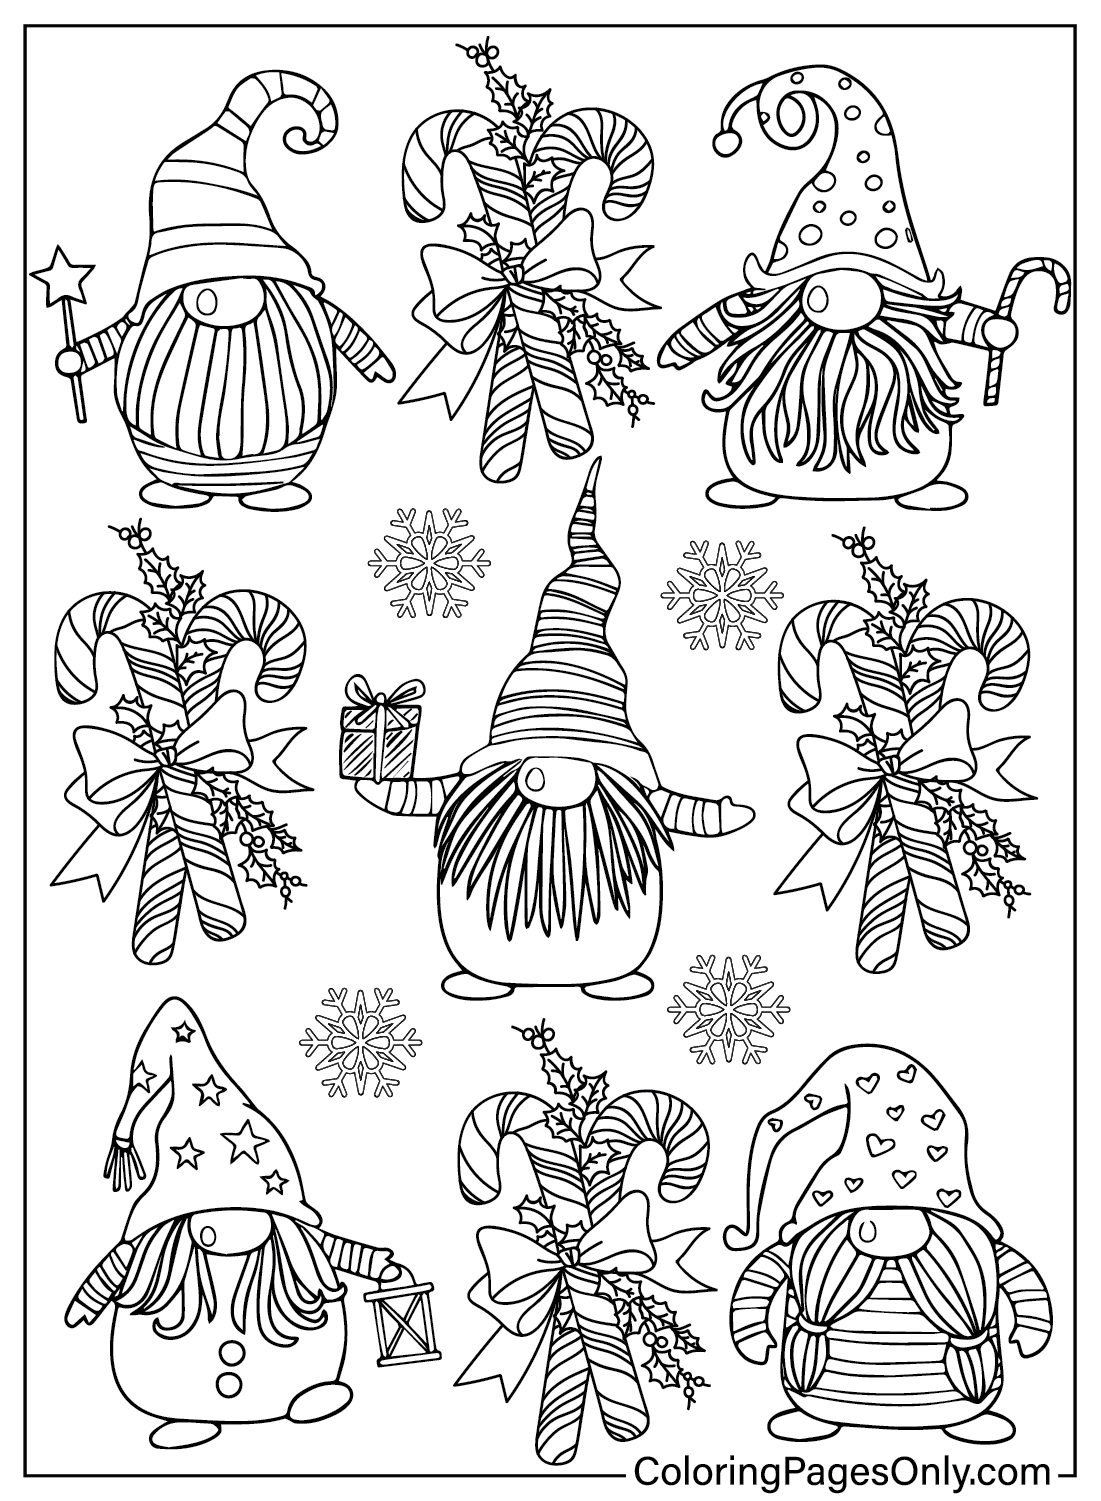 86 Gnome Coloring Pages - Coloringpagesonly.com